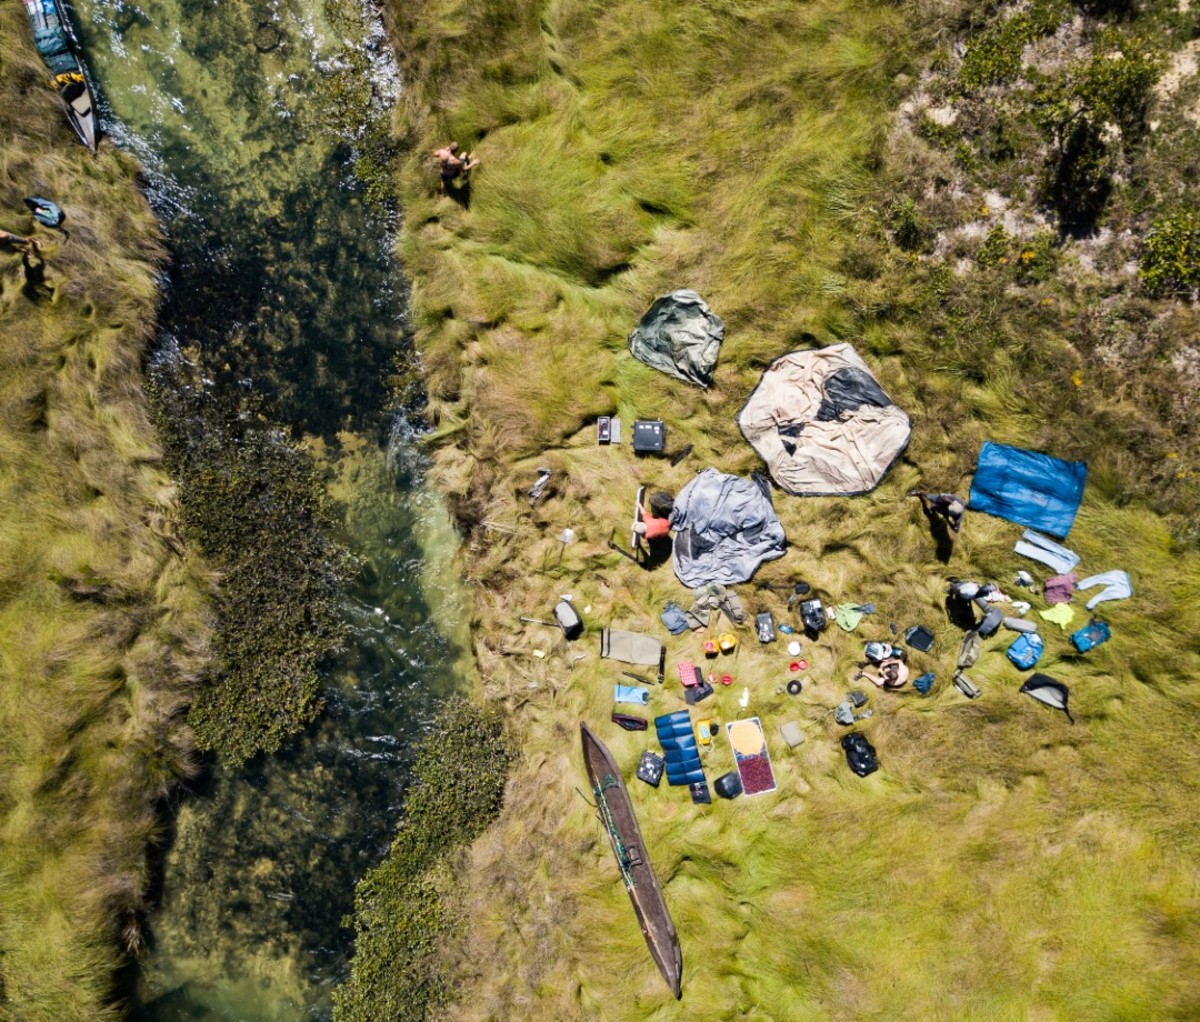 A view of a river expedition from above.